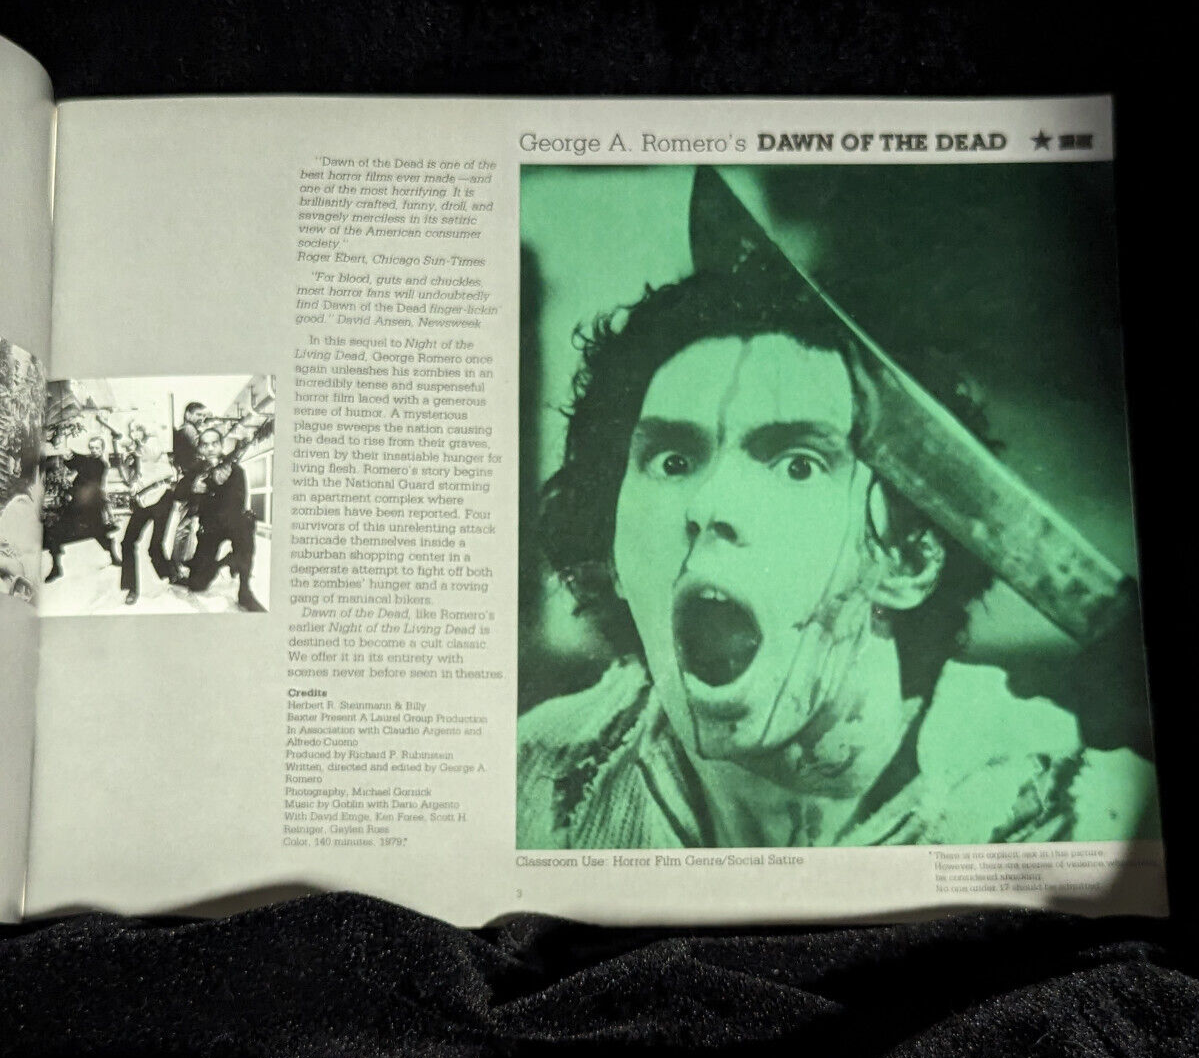 Featured image for “Cinema 5 Cult Art Film Distribution Catalog 1980 Dawn of the Dead”